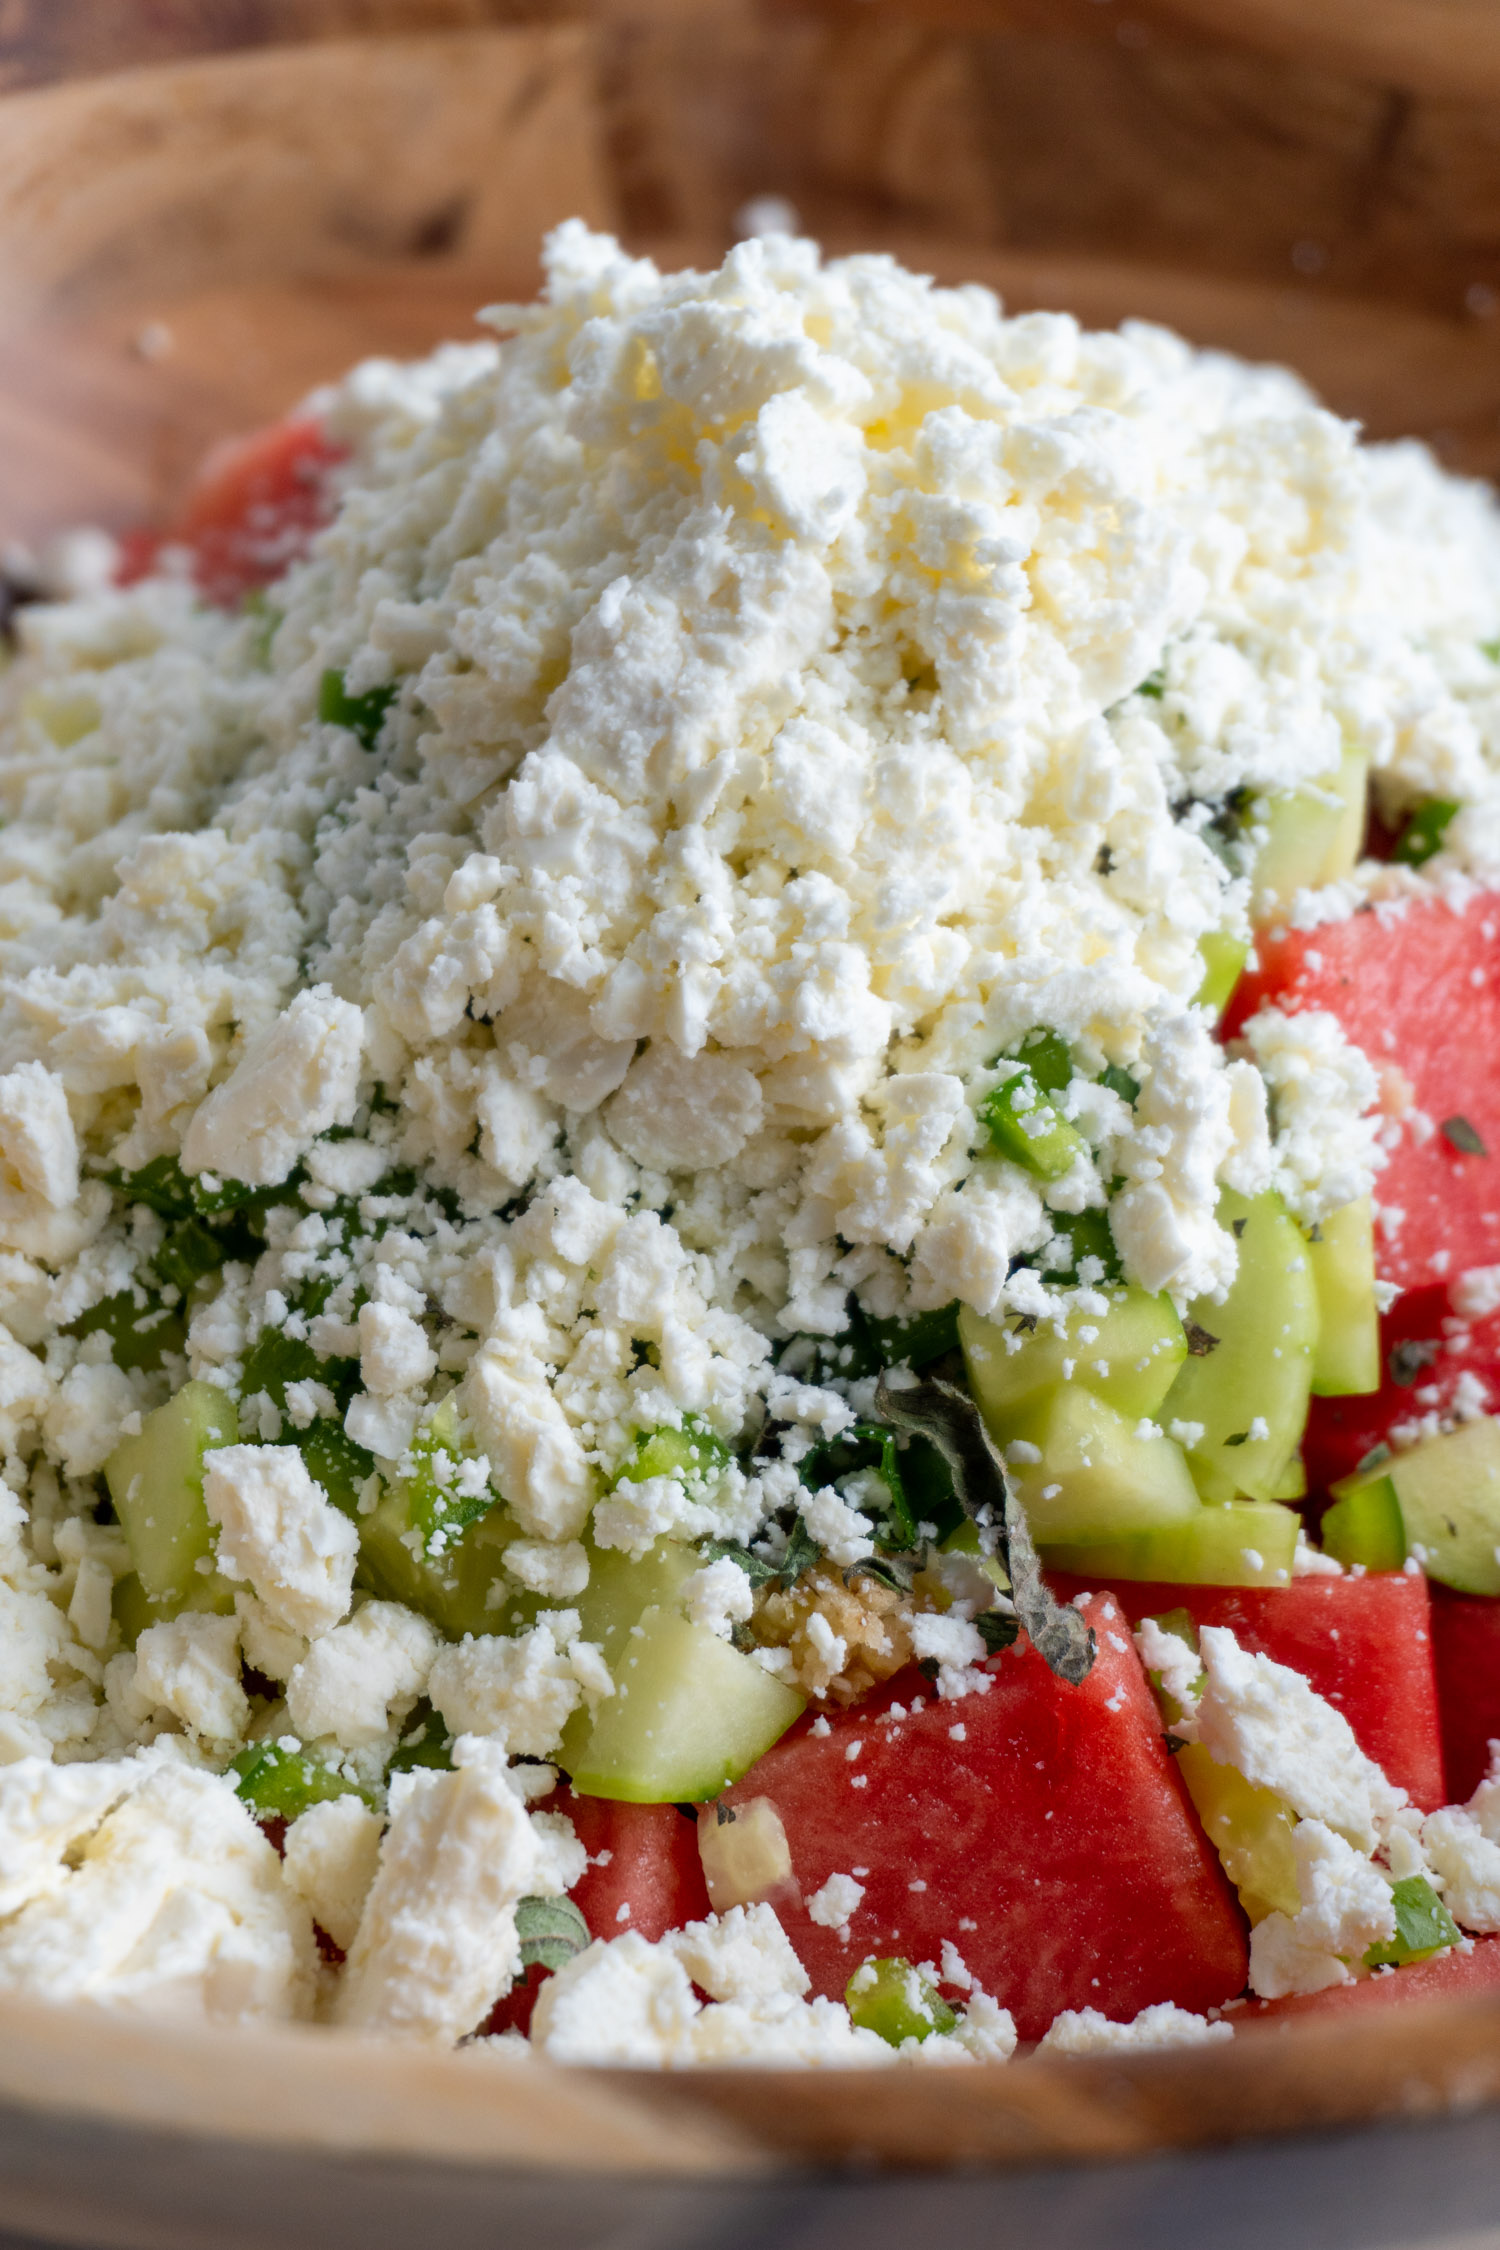 feta cheese sprinkled over watermelon and cucumber salad